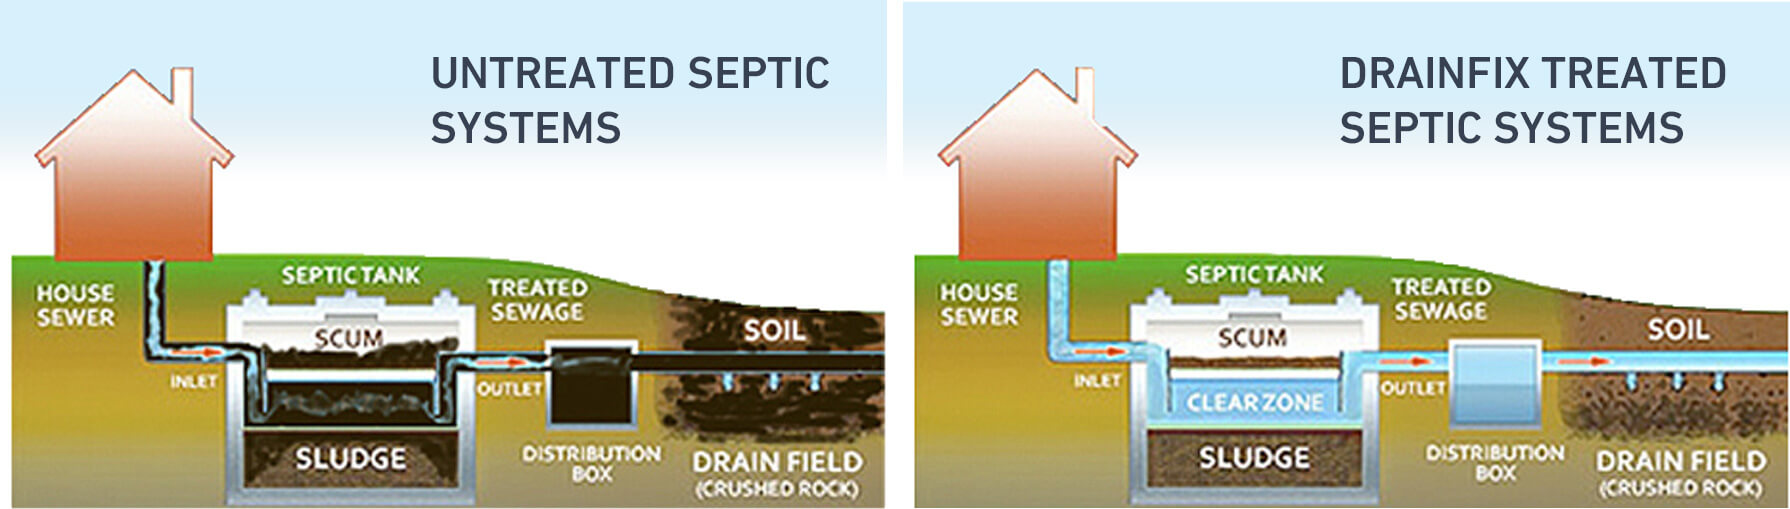 Drainfix Treated Septic Systems